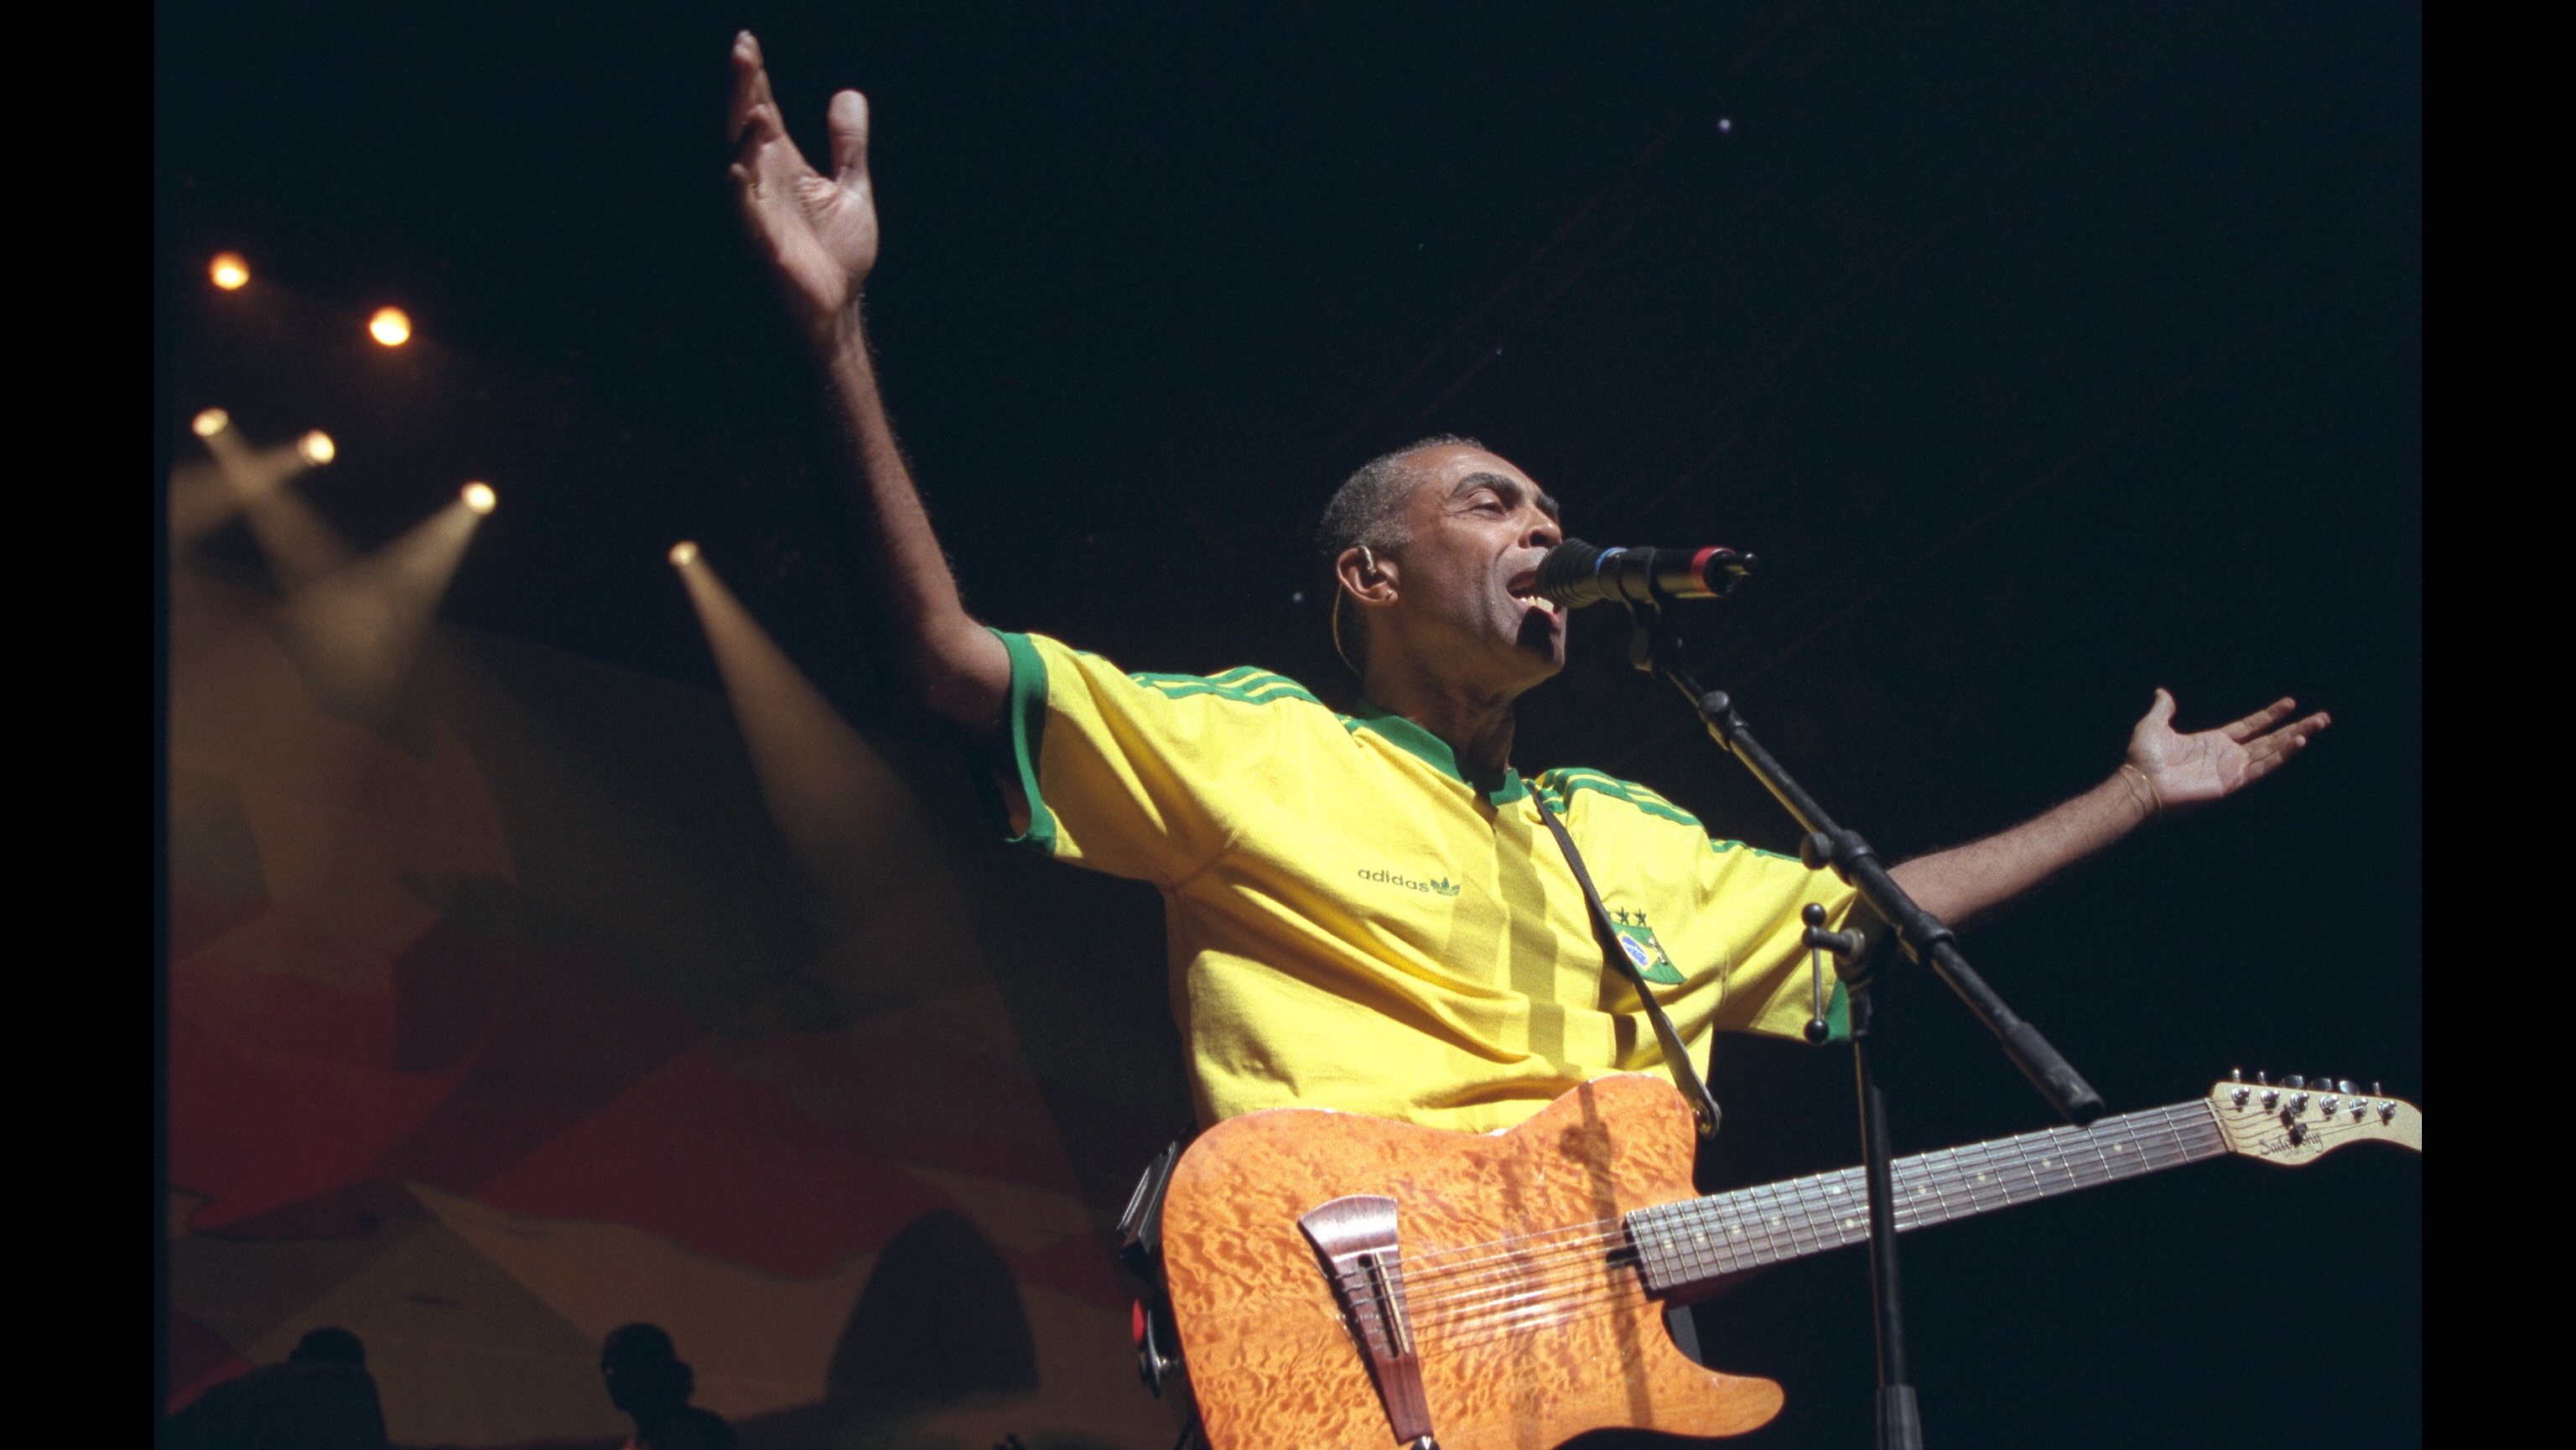 GILBERTO GIL IN CONCERT AT THE OLYMPIA IN PARIS